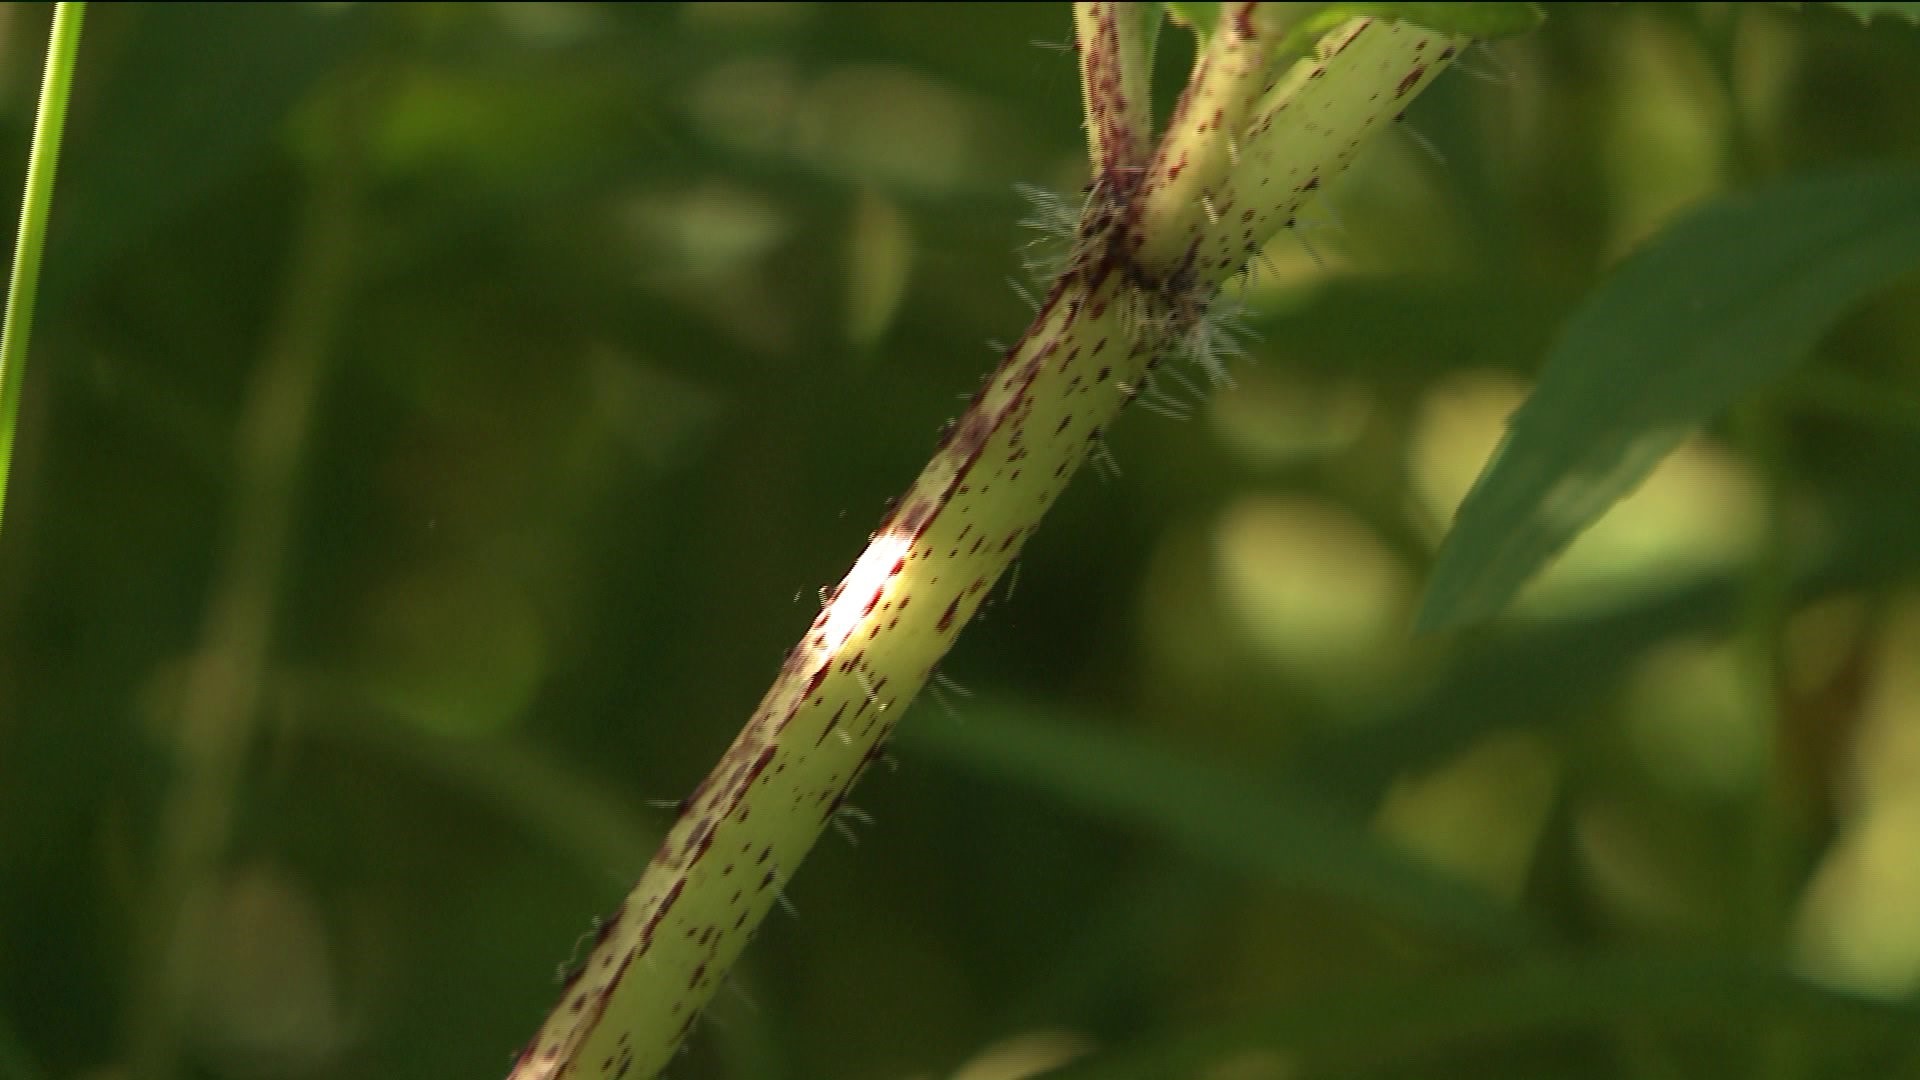 Poisonous hogweed plant in Connecticut can cause burns, blisters